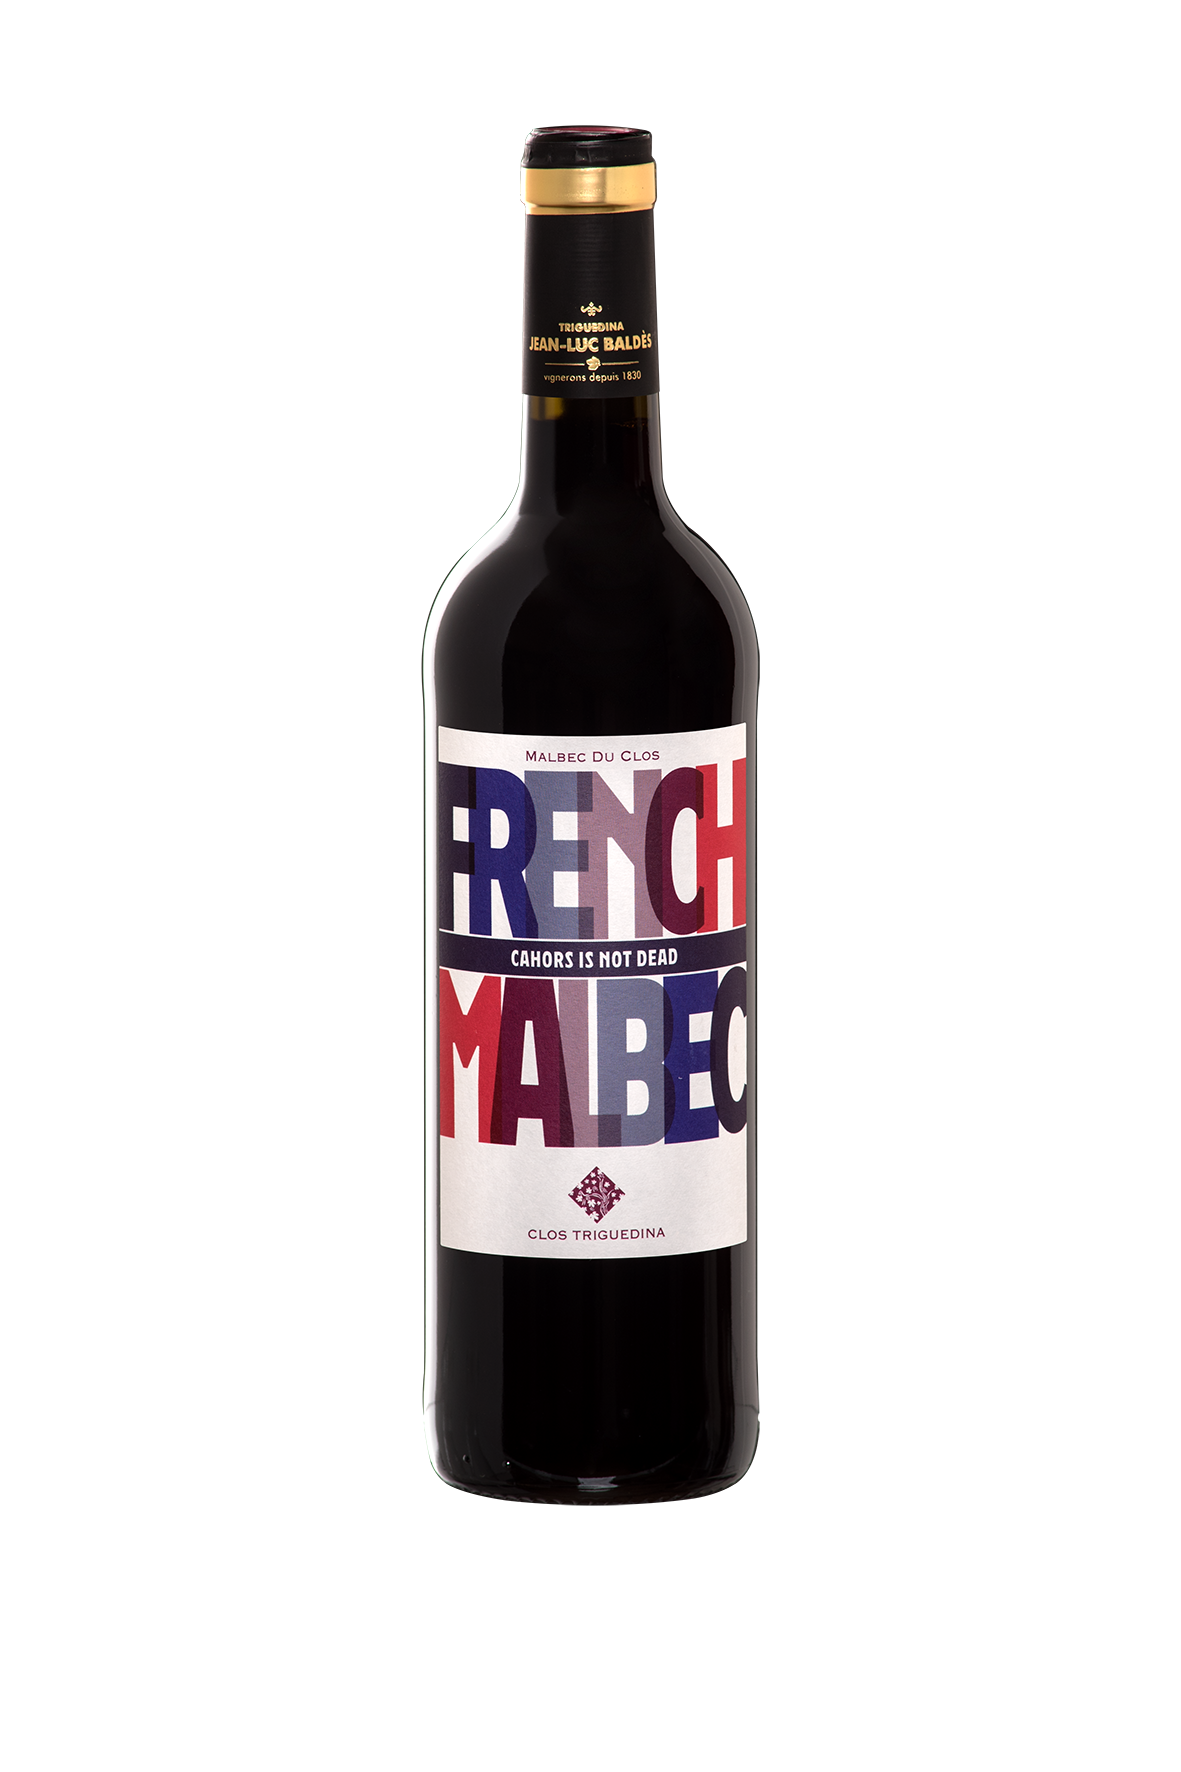 French Malbec - Cahors is not dead